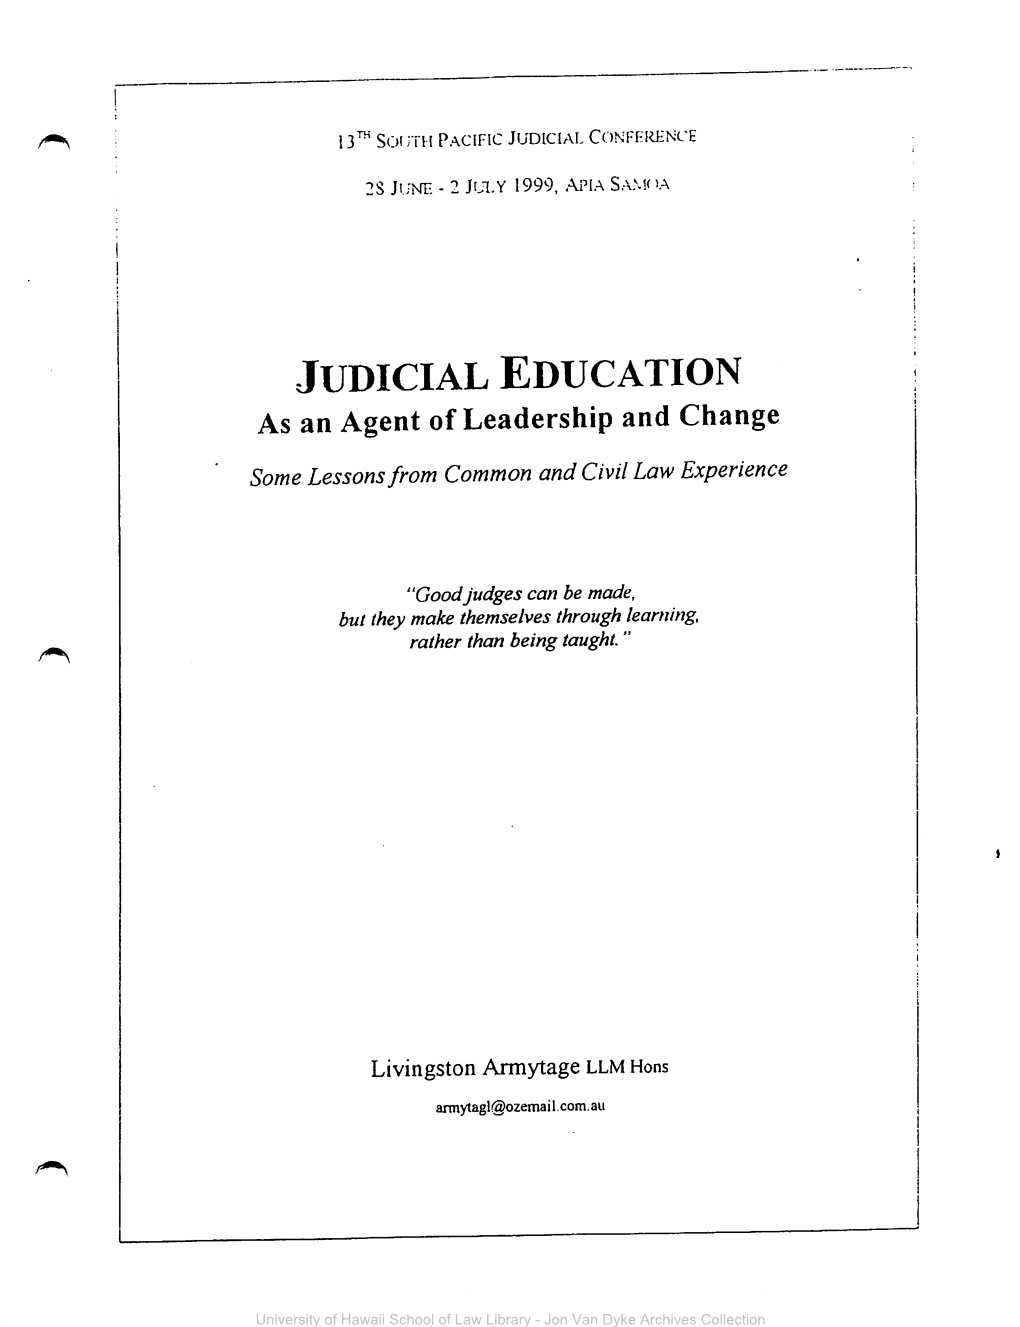 JUDICIAL EDUCATION As an Agent of Leadership and Change